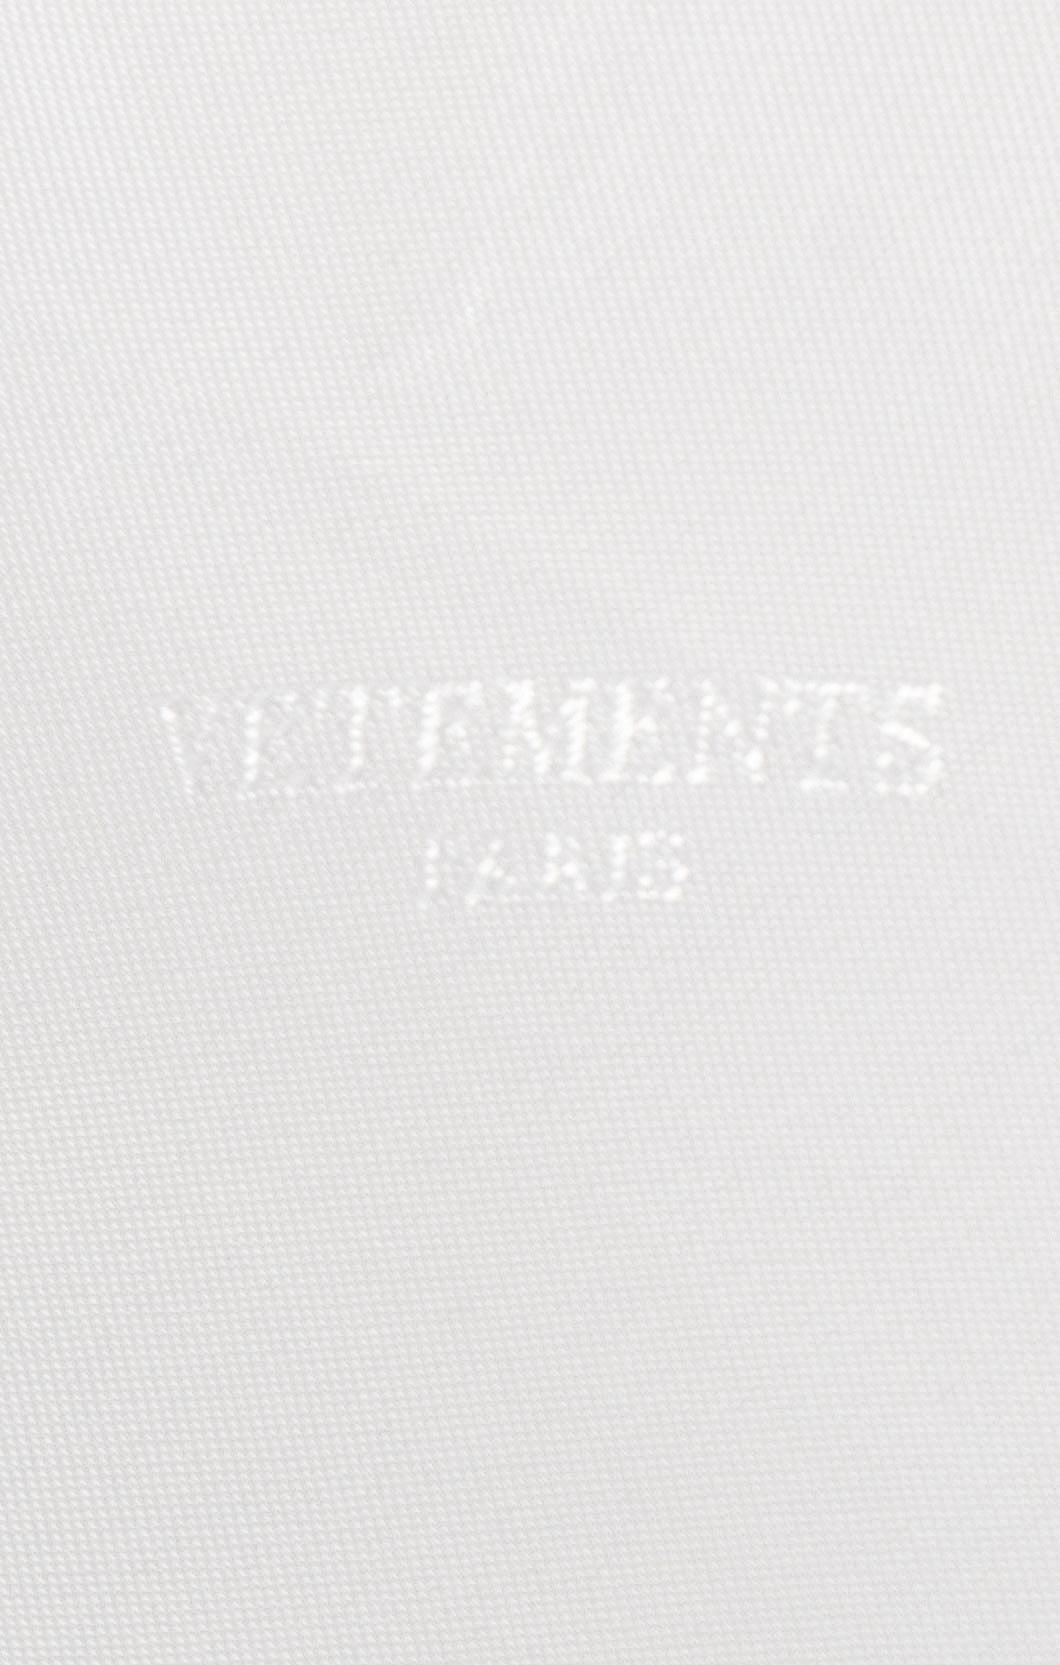 VETEMENTS (RARE & NEW) with tags Coat Size: Men's S / Fits like Womens M-L